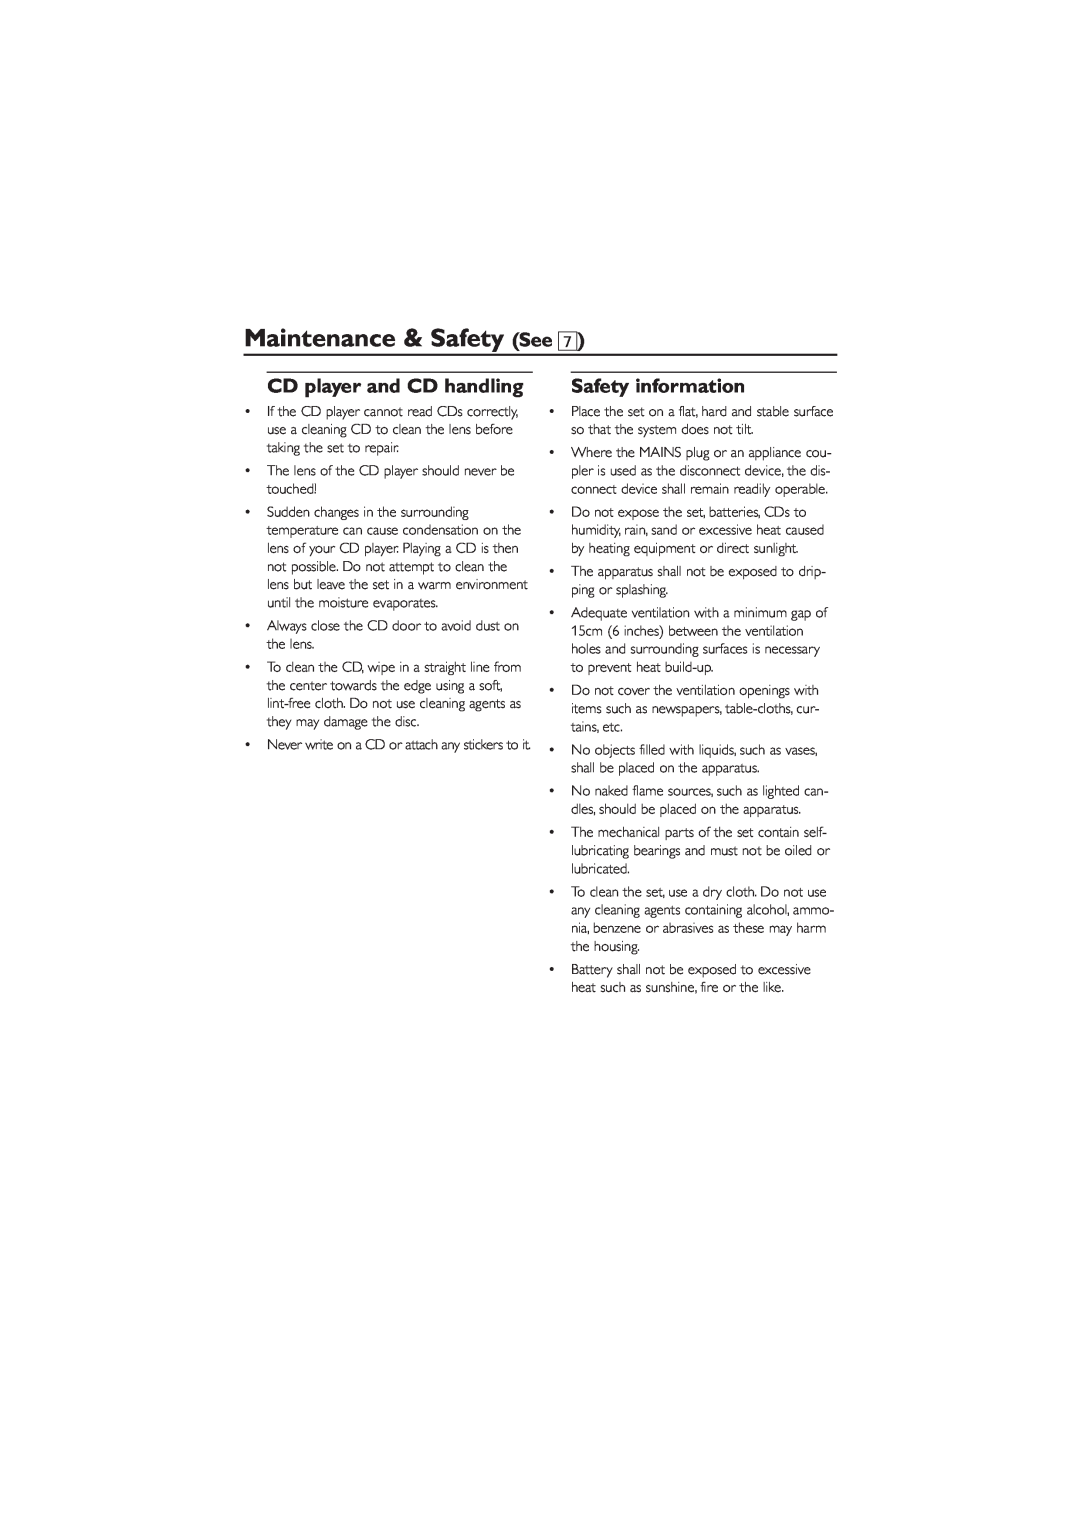 Philips AZ1839 user manual Maintenance & Safety See, CD player and CD handling, Safety information 